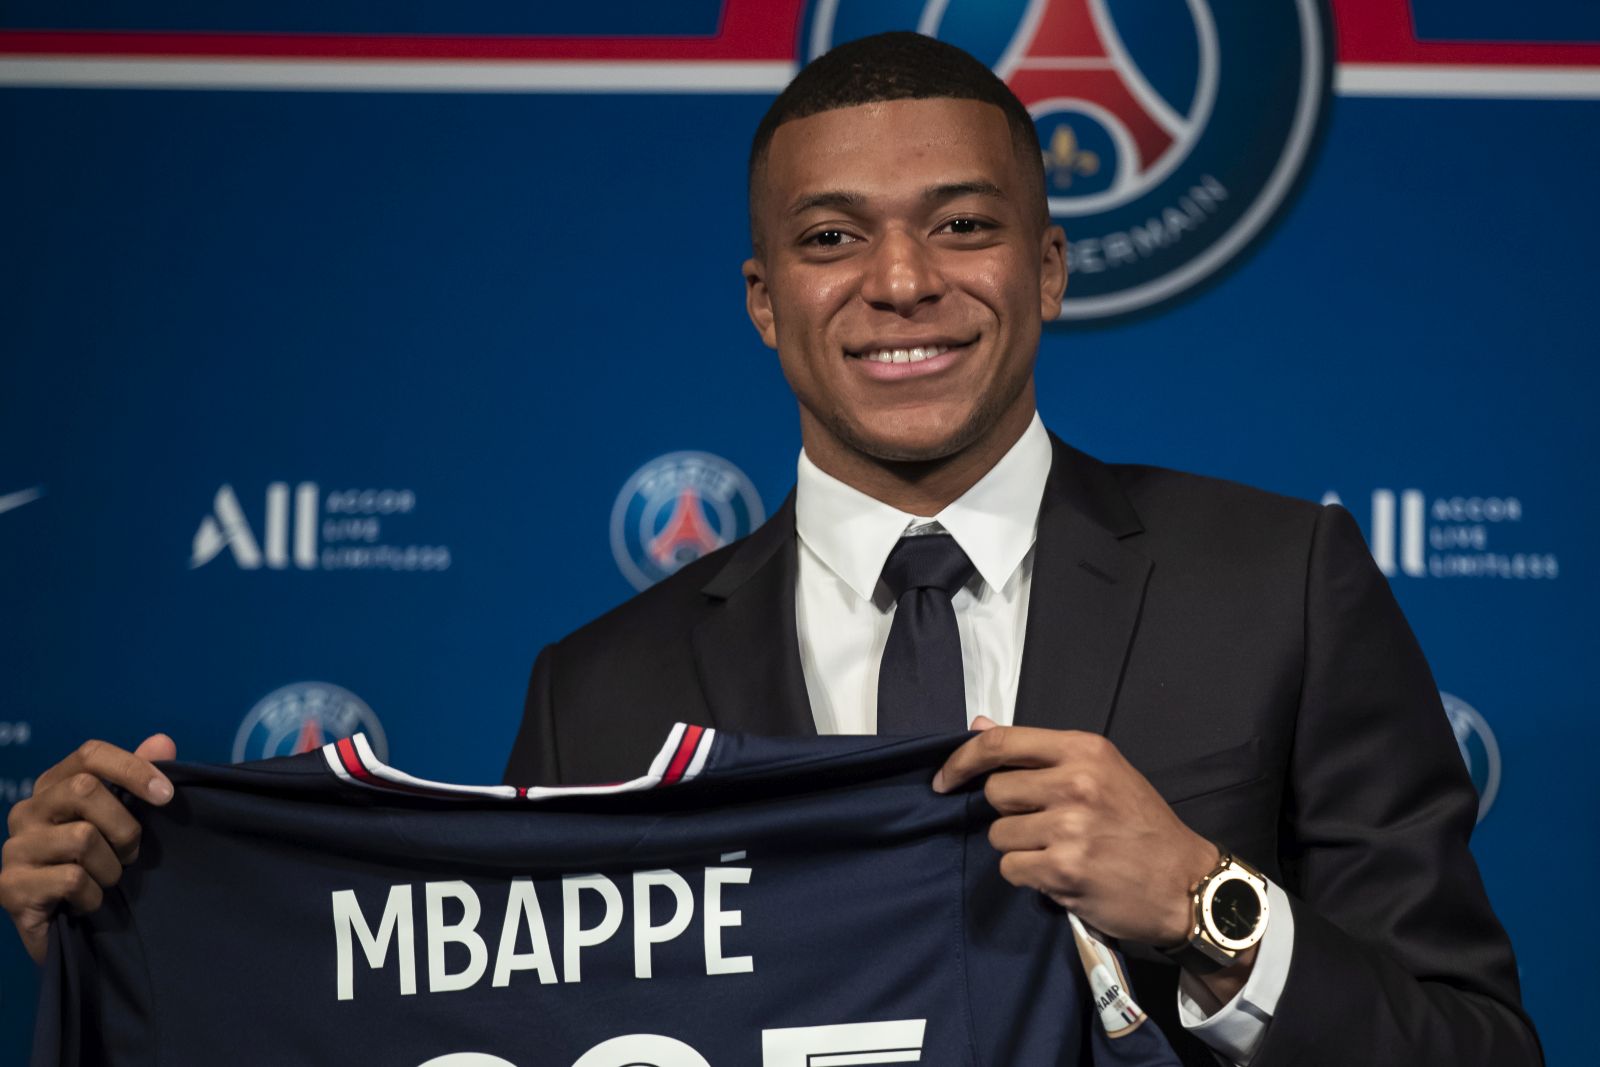 epa09969928 Paris Saint Germain's Kylian Mbappe poses with a PSG jersey after his press conference at the Parc des Princes stadium in Paris, France, 23 May 2022. Kylian Mbappe renewed his contract with French Ligue 1 soccer club Paris Saint-Germain until 2025.  EPA/Christophe Petit Tesson